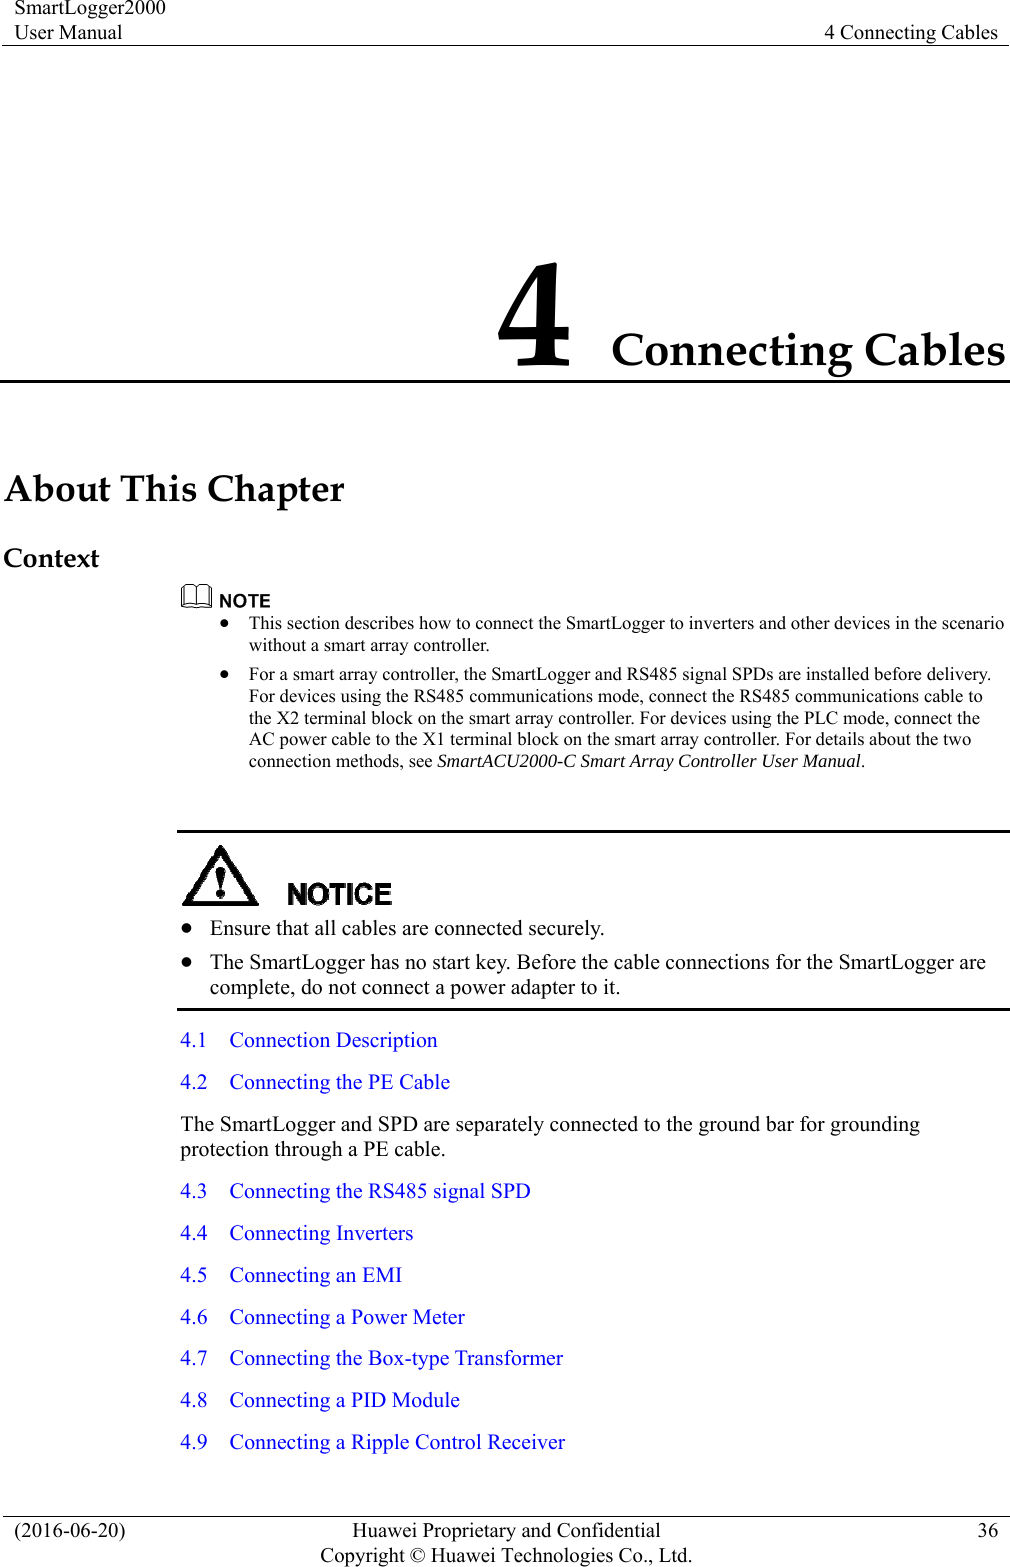 SmartLogger2000 User Manual  4 Connecting Cables (2016-06-20)  Huawei Proprietary and Confidential         Copyright © Huawei Technologies Co., Ltd.36 4 Connecting Cables About This Chapter Context   This section describes how to connect the SmartLogger to inverters and other devices in the scenario without a smart array controller.  For a smart array controller, the SmartLogger and RS485 signal SPDs are installed before delivery. For devices using the RS485 communications mode, connect the RS485 communications cable to the X2 terminal block on the smart array controller. For devices using the PLC mode, connect the AC power cable to the X1 terminal block on the smart array controller. For details about the two connection methods, see SmartACU2000-C Smart Array Controller User Manual.    Ensure that all cables are connected securely.    The SmartLogger has no start key. Before the cable connections for the SmartLogger are complete, do not connect a power adapter to it. 4.1  Connection Description 4.2    Connecting the PE Cable The SmartLogger and SPD are separately connected to the ground bar for grounding protection through a PE cable.   4.3    Connecting the RS485 signal SPD 4.4  Connecting Inverters 4.5    Connecting an EMI 4.6    Connecting a Power Meter 4.7    Connecting the Box-type Transformer 4.8    Connecting a PID Module 4.9    Connecting a Ripple Control Receiver 